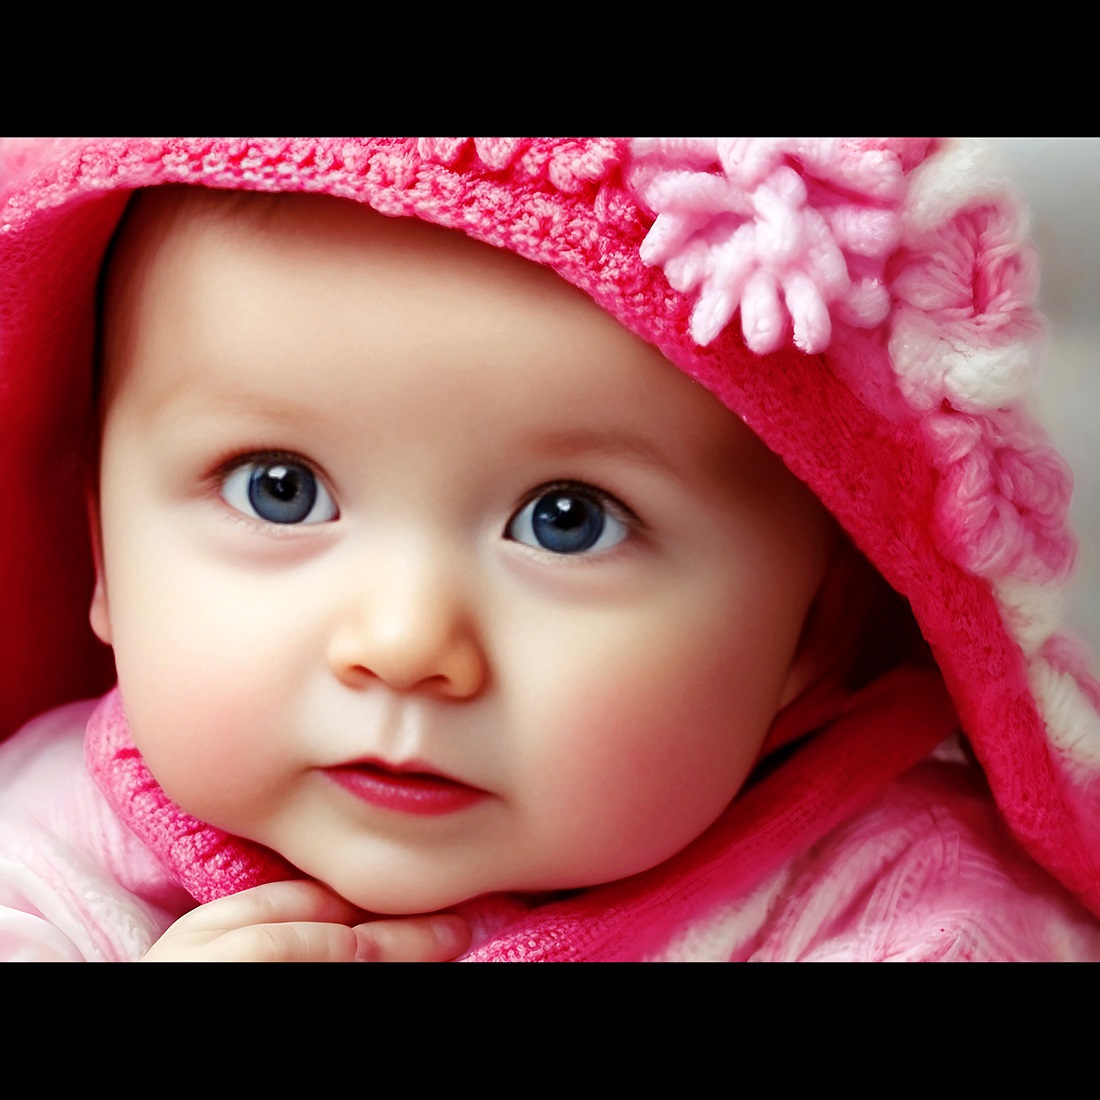 Portrait Of Adorable Baby Girl Wearing Pink Dress v1 cover image.